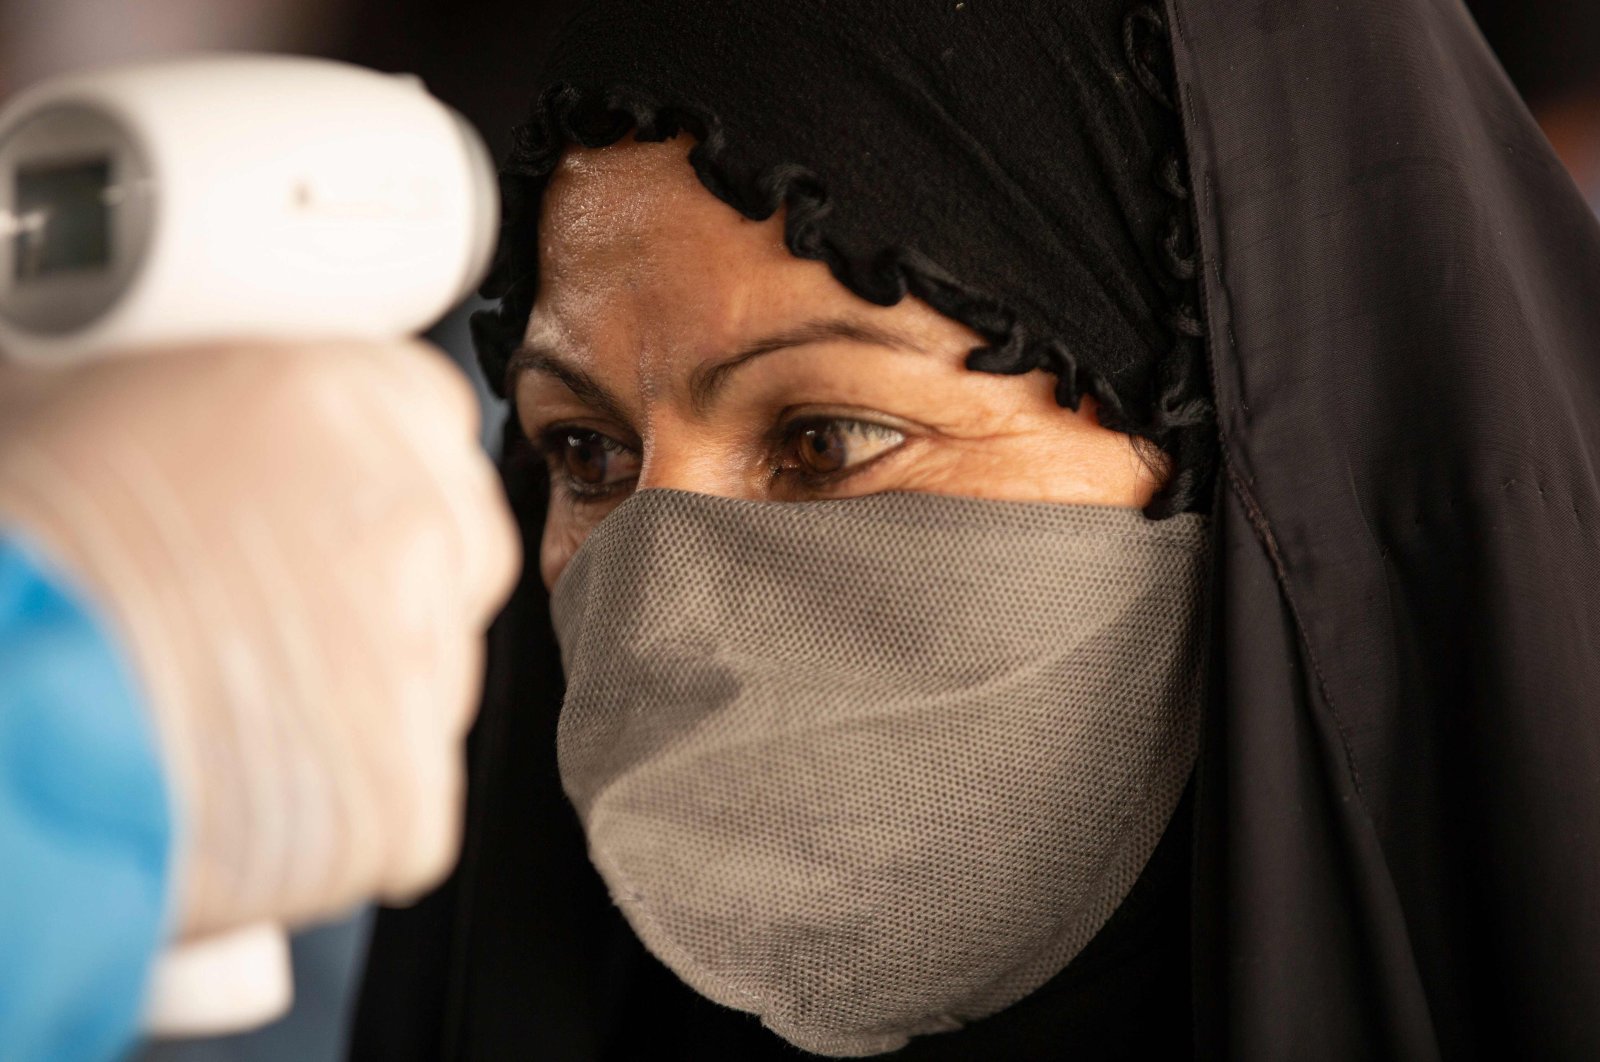 An Iraqi woman who had been stranded in Iran due to the coronavirus pandemic, gets her temperature checked by a health worker upon her arrival to Iraq via the Al-Shalamija border crossing, west of the southern city of Basra, Iraq, May 27, 2020. (AFP Photo)